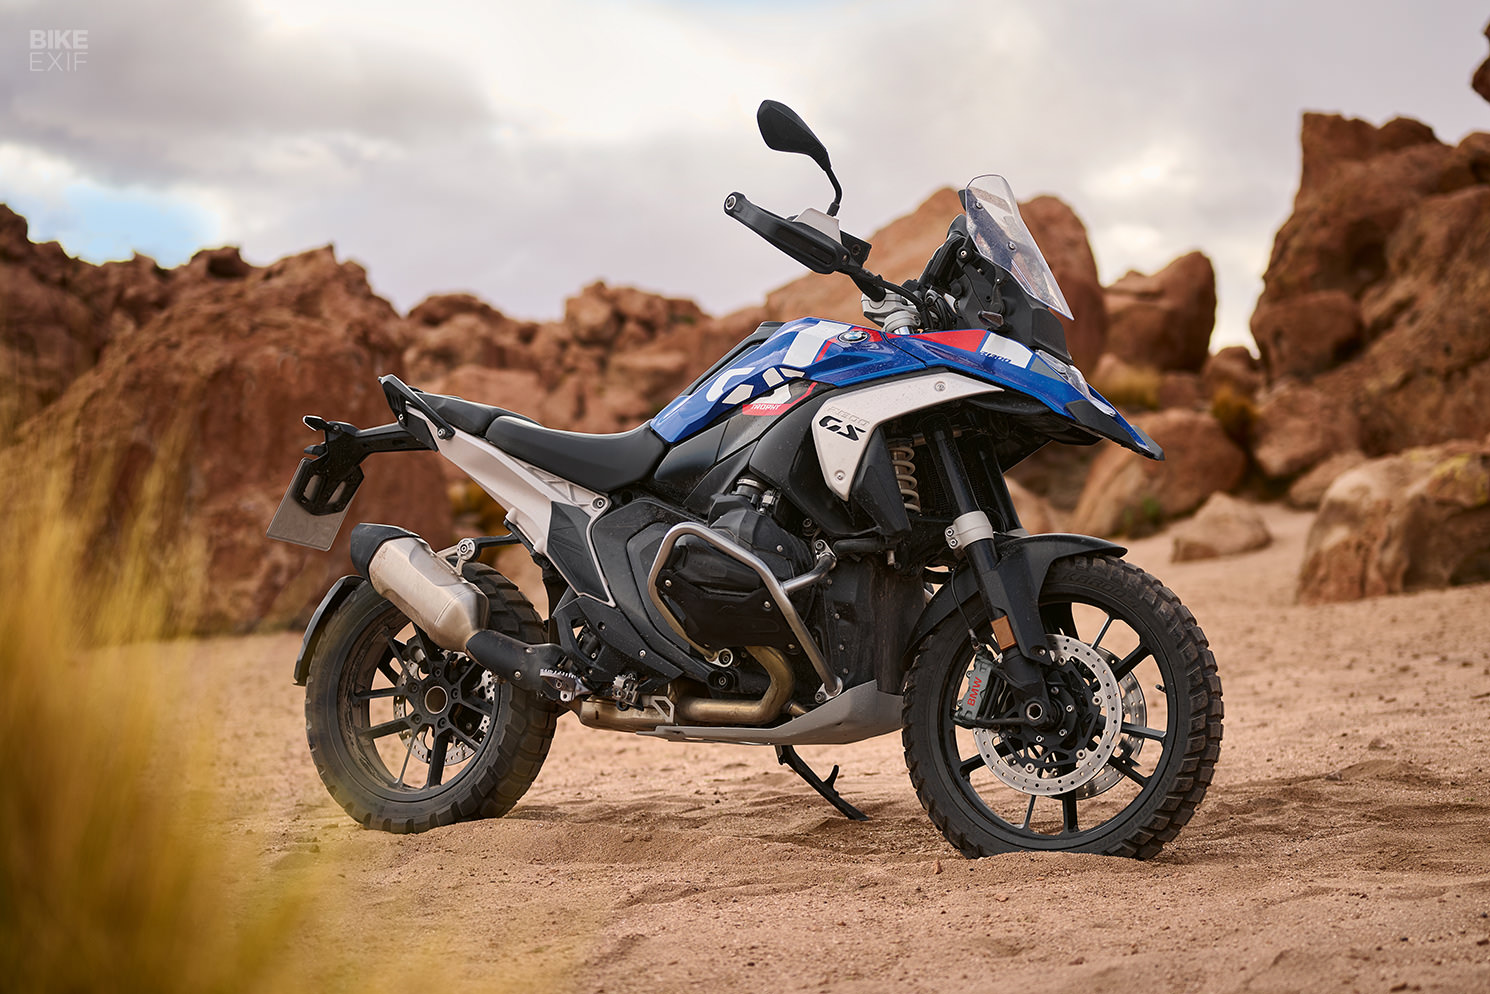 First look: The new BMW R1300GS finally breaks cover